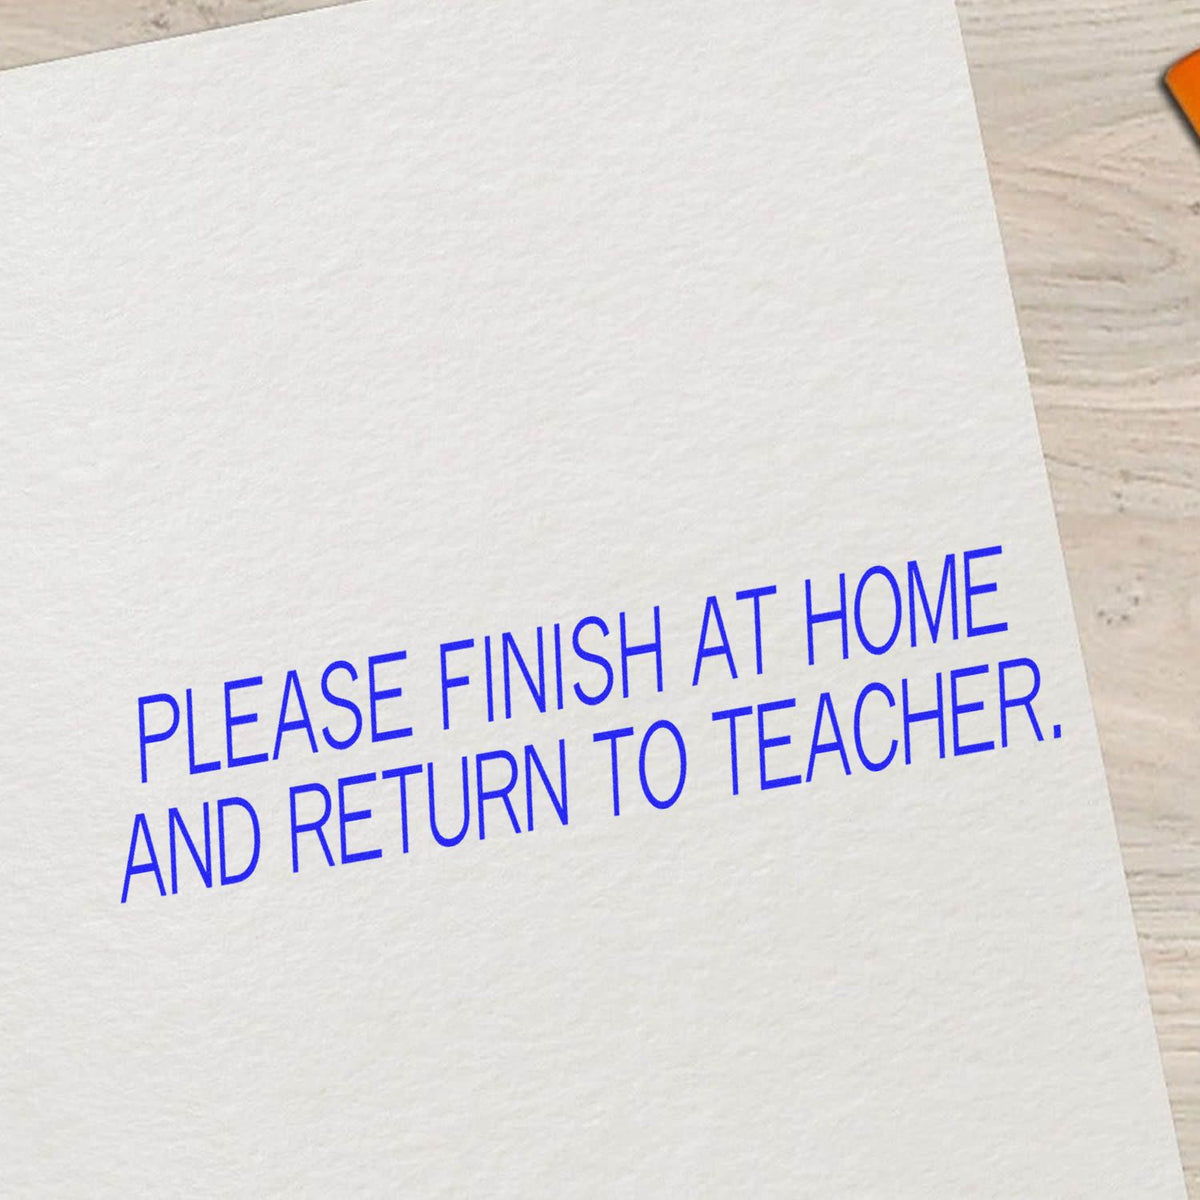 Large Please Finish At Home And Return To Teacher Rubber Stamp In Use Photo